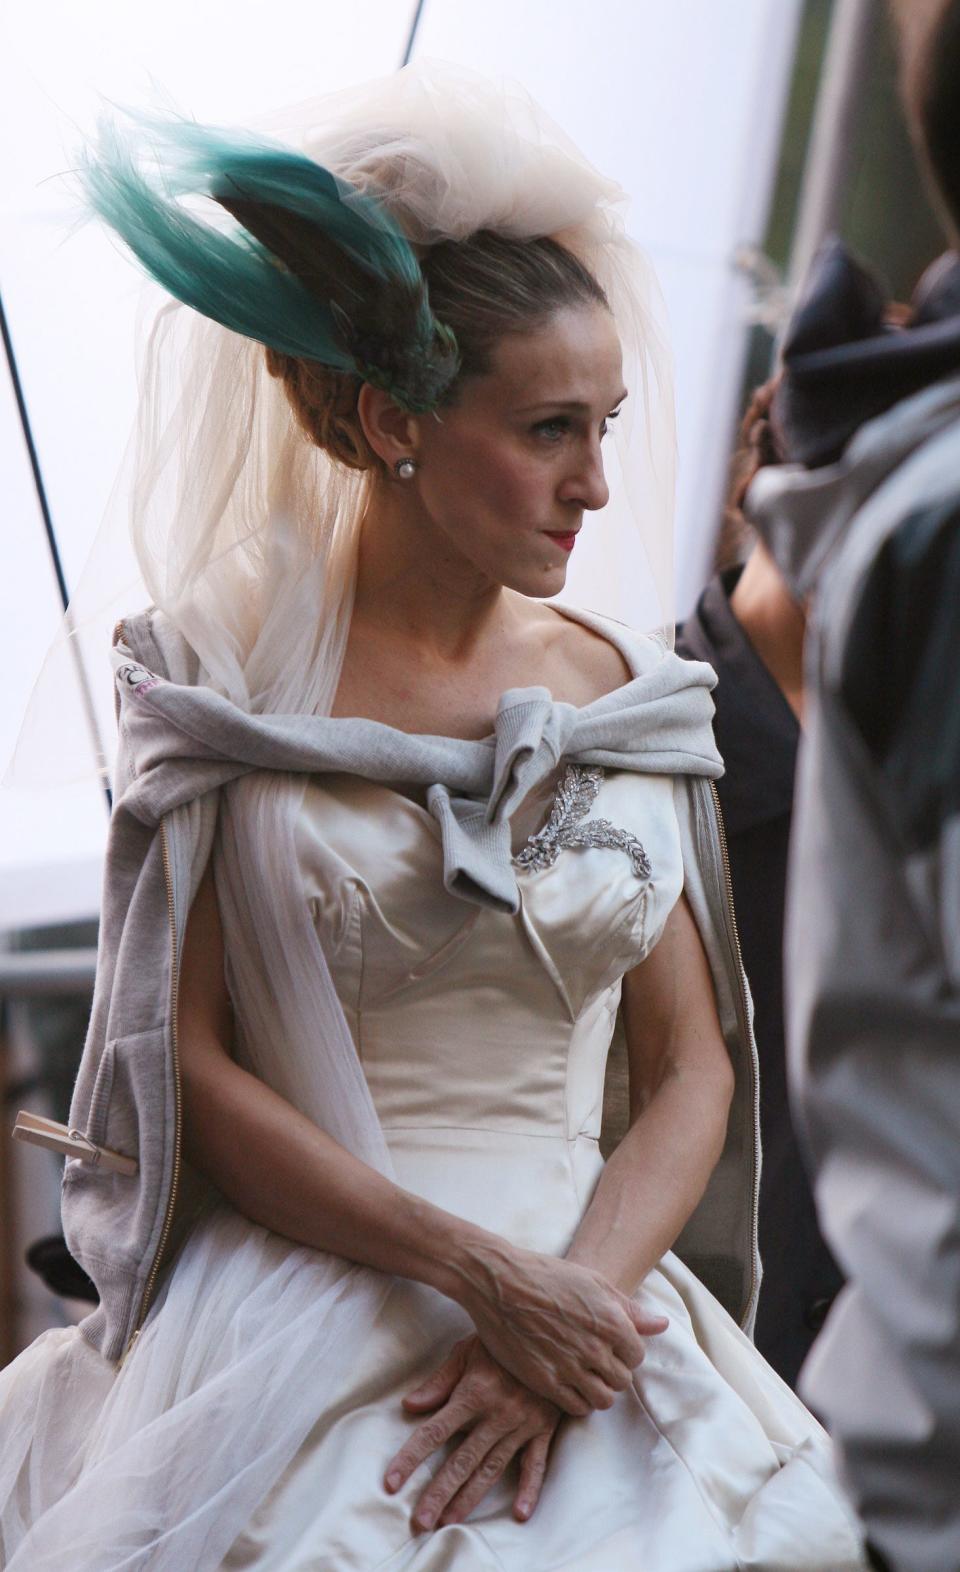 Sarah Jessica Parker in Carrie bridal gown, resting between takes while shooting 2008's "Sex and the City."